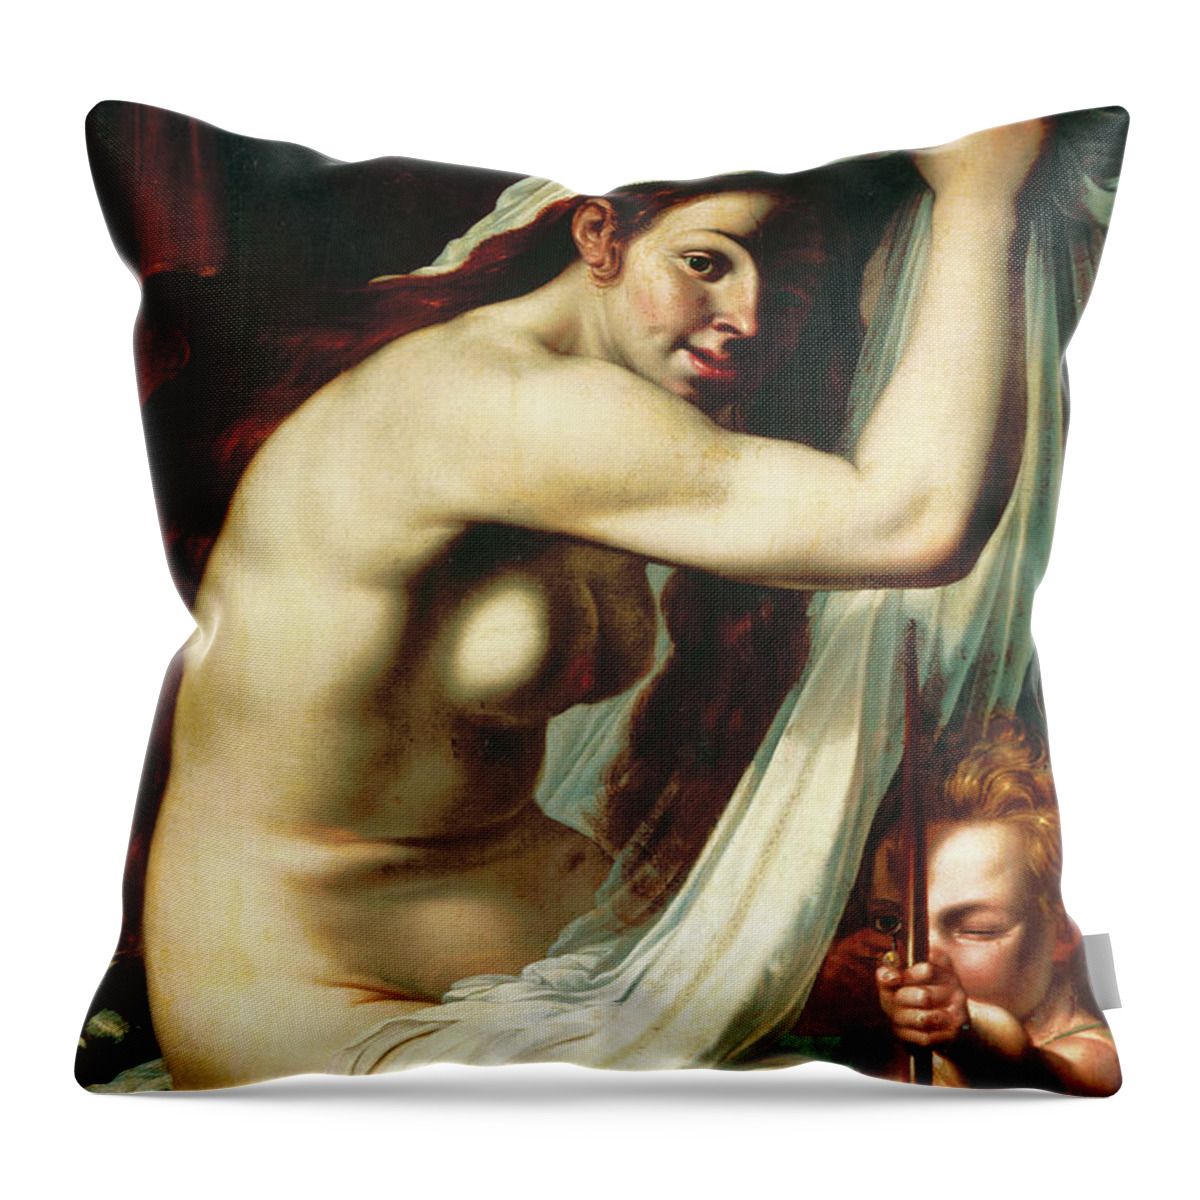 Venus Throw Pillow featuring the painting Venus and Cupid by Werner Jacobsz van den Valckert